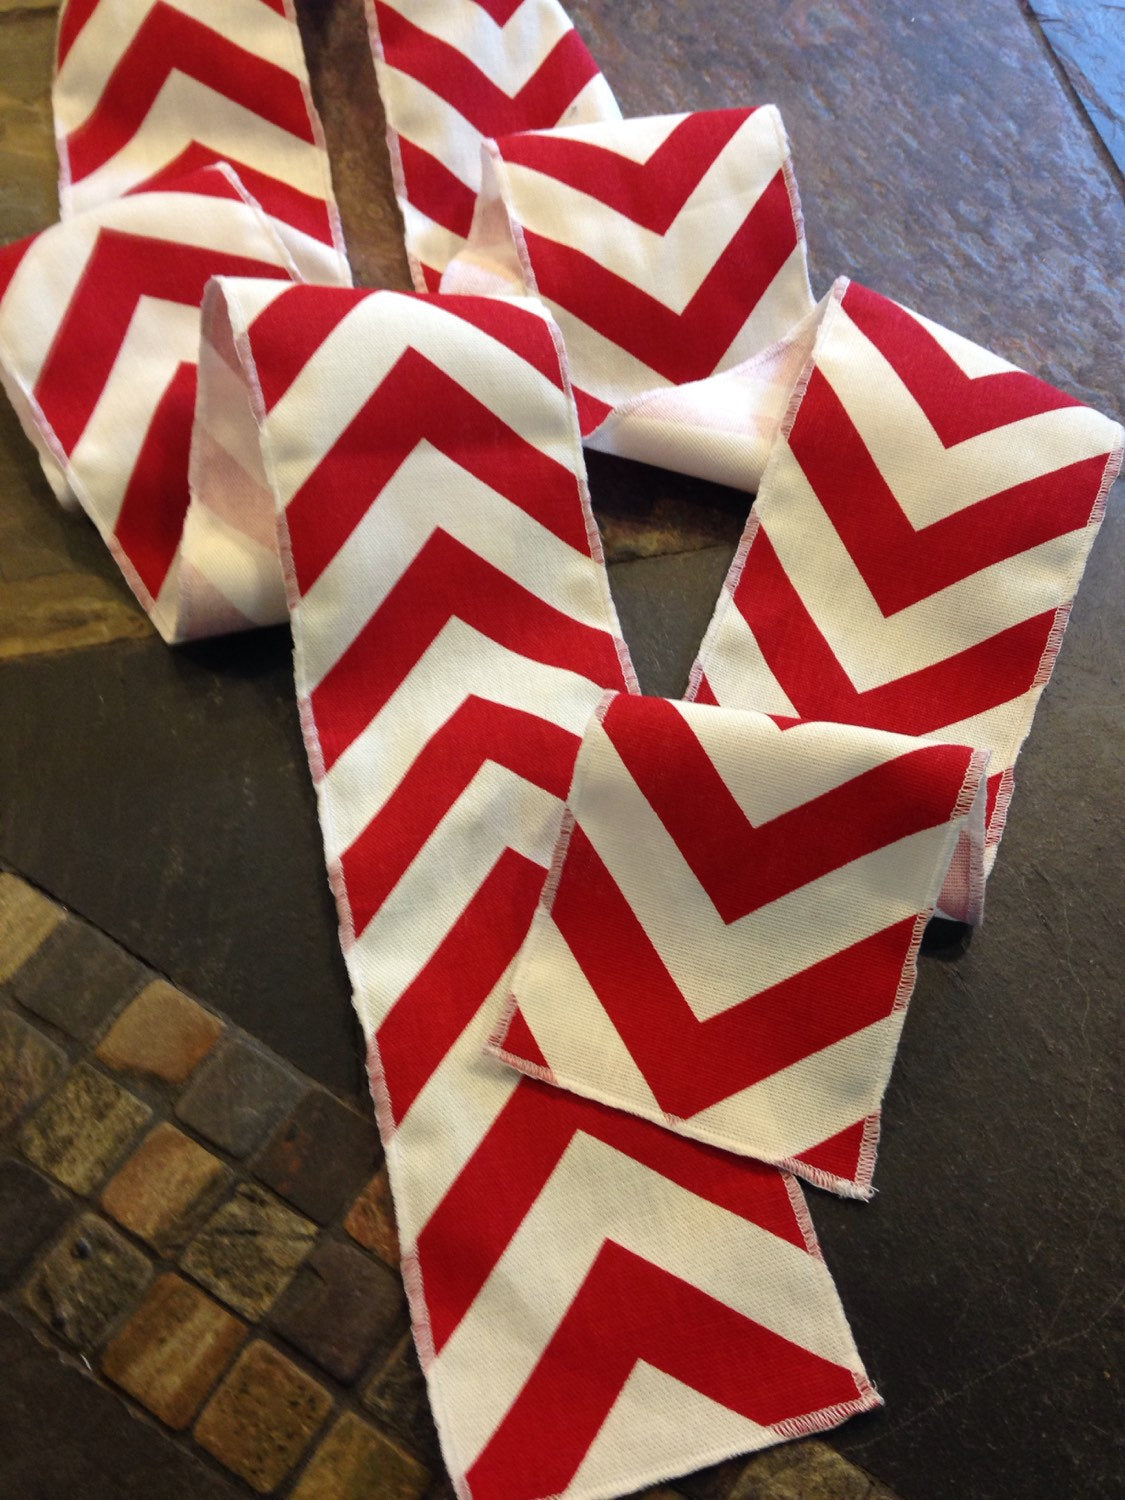 BASEBALL Table Runners Ribbon Party Themed Red Chevron Modern Wedding Table Runner set of 2 by your choice of length Chevron runner